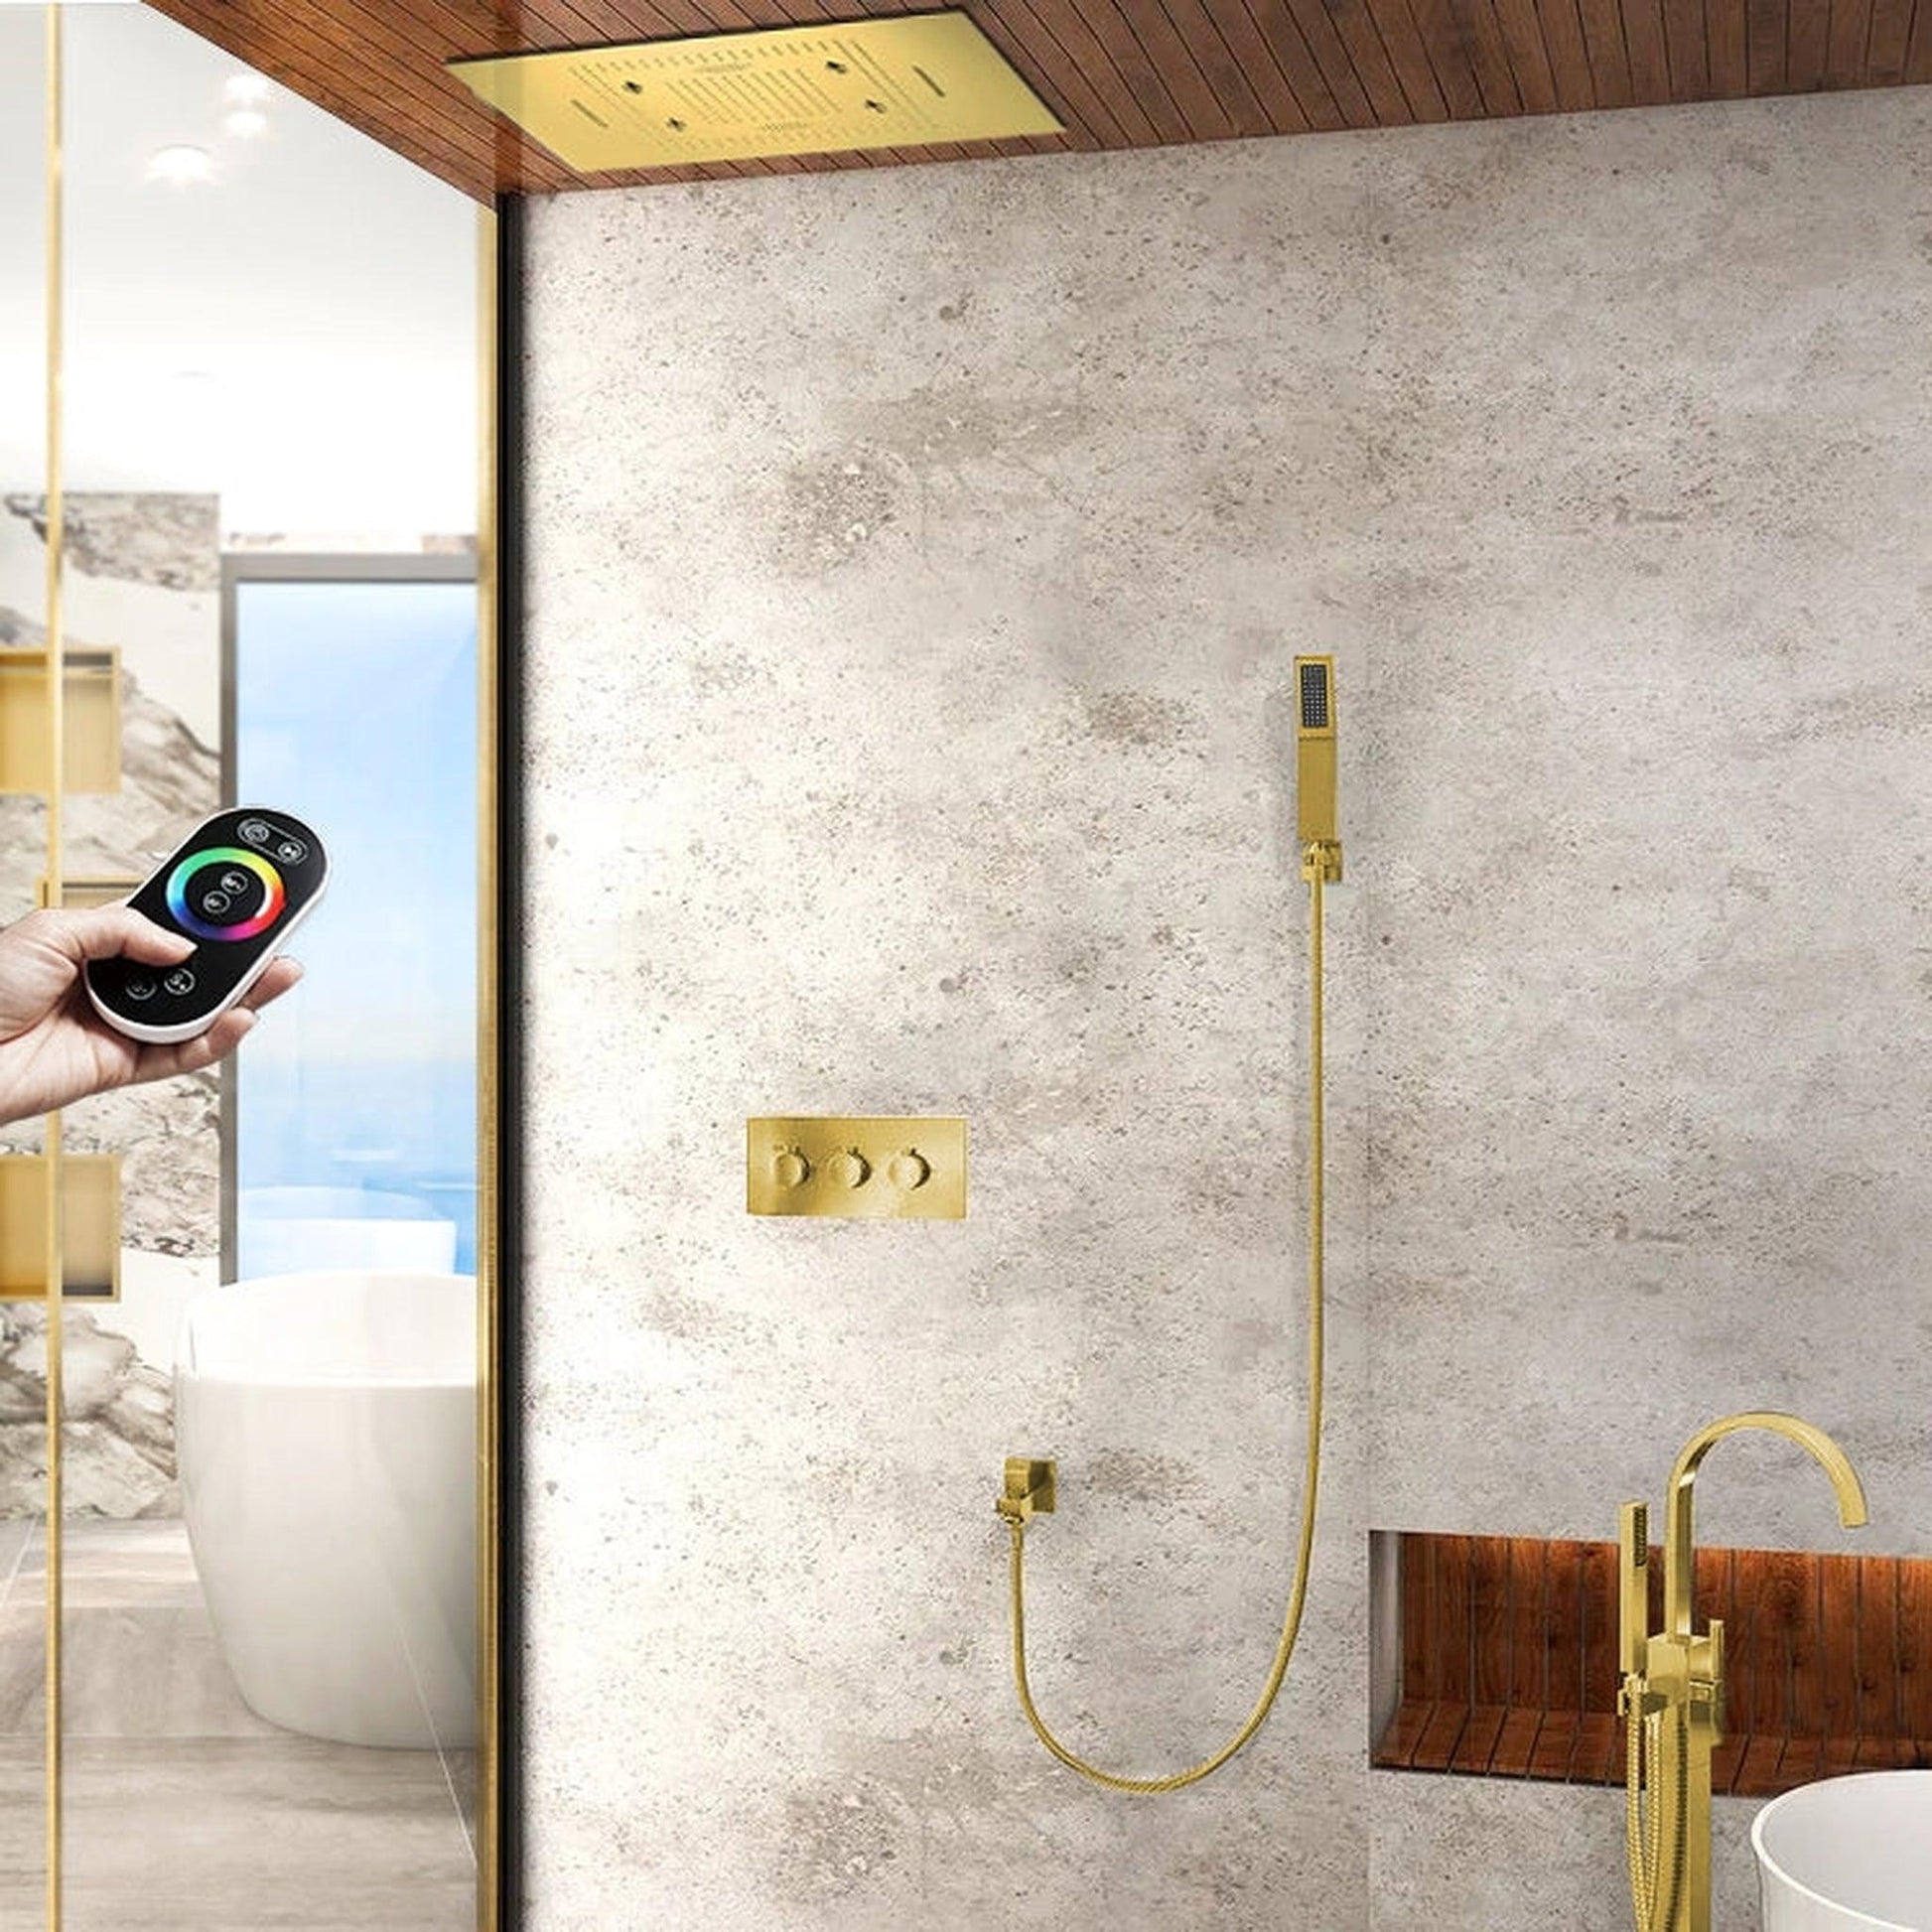 Fontana Terni Polished Gold Recessed Ceiling Mounted Remote Controlled Thermostatic LED Rainfall Waterfall Mist Hot and Cold Shower System With Square Hand Shower